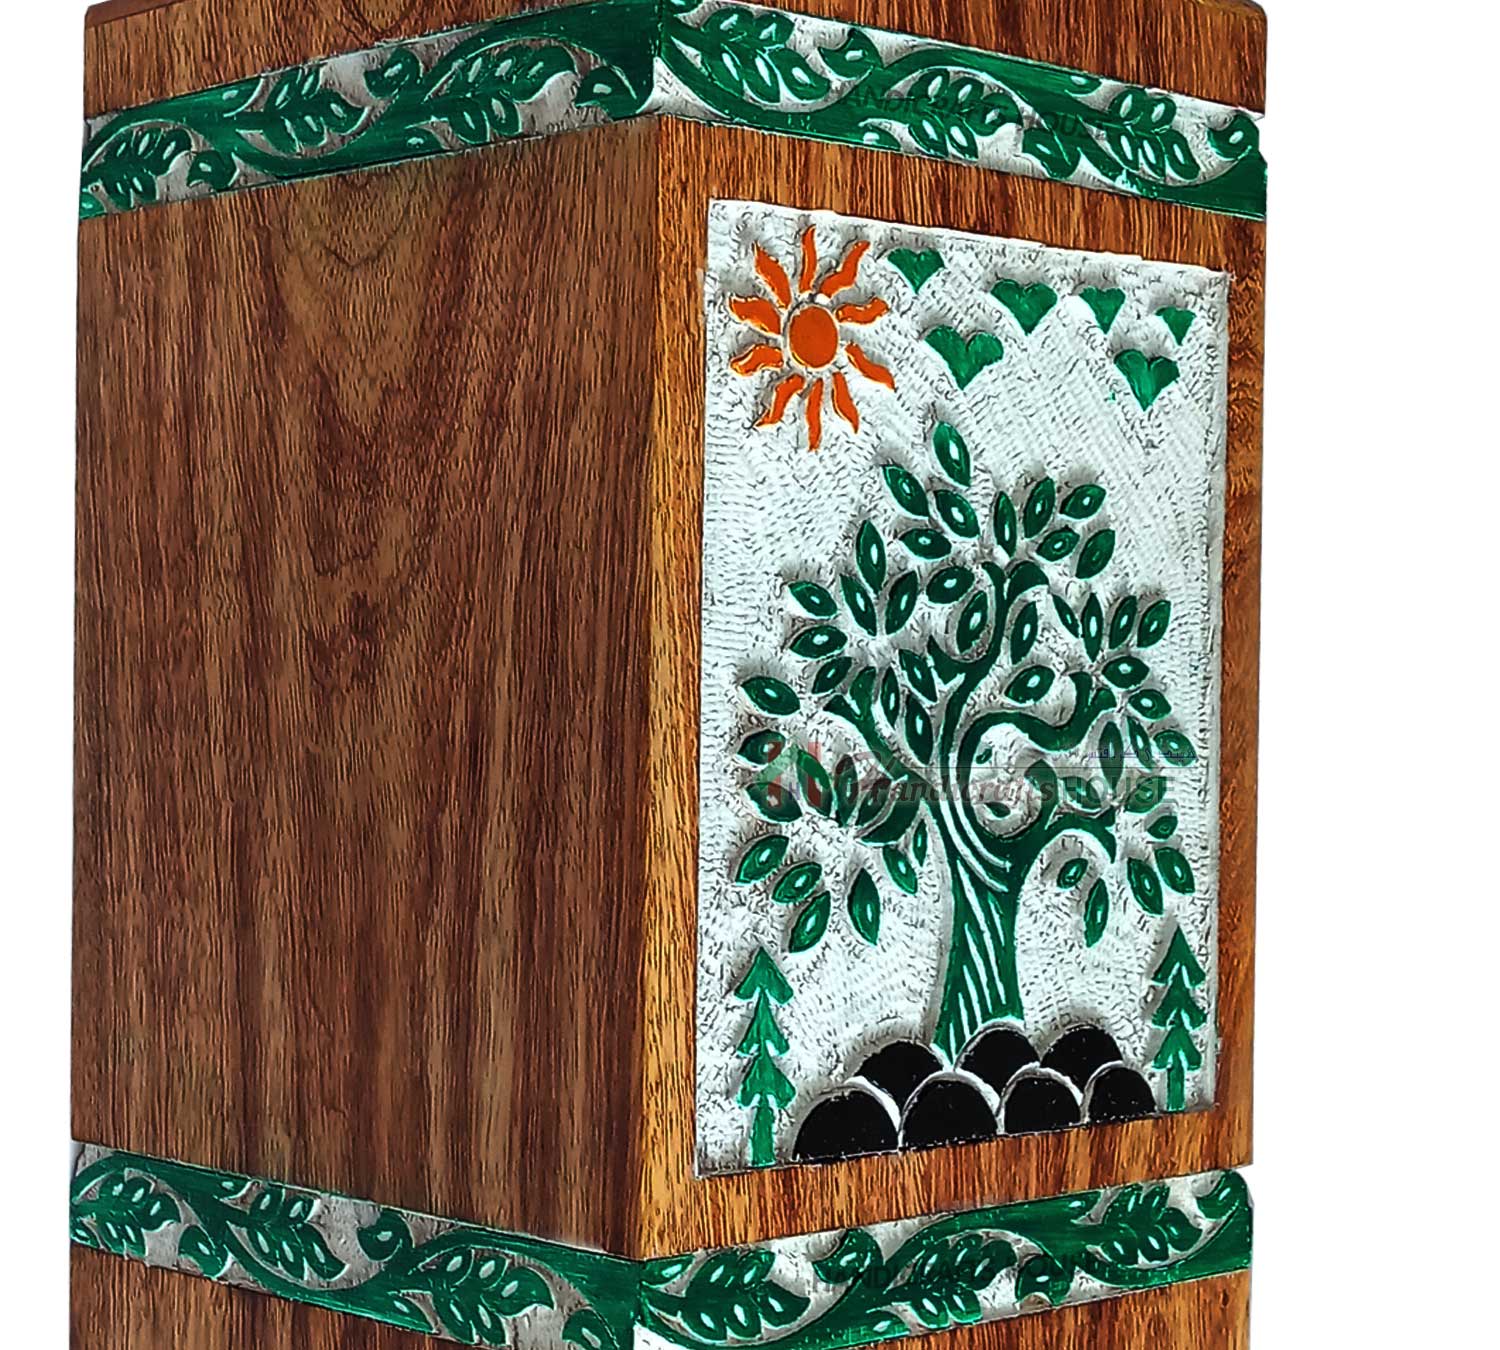 Funeral Urns For Ashes, Decorative Tableware Timber Box, Wood Cremation Urn - Memorials Boxes